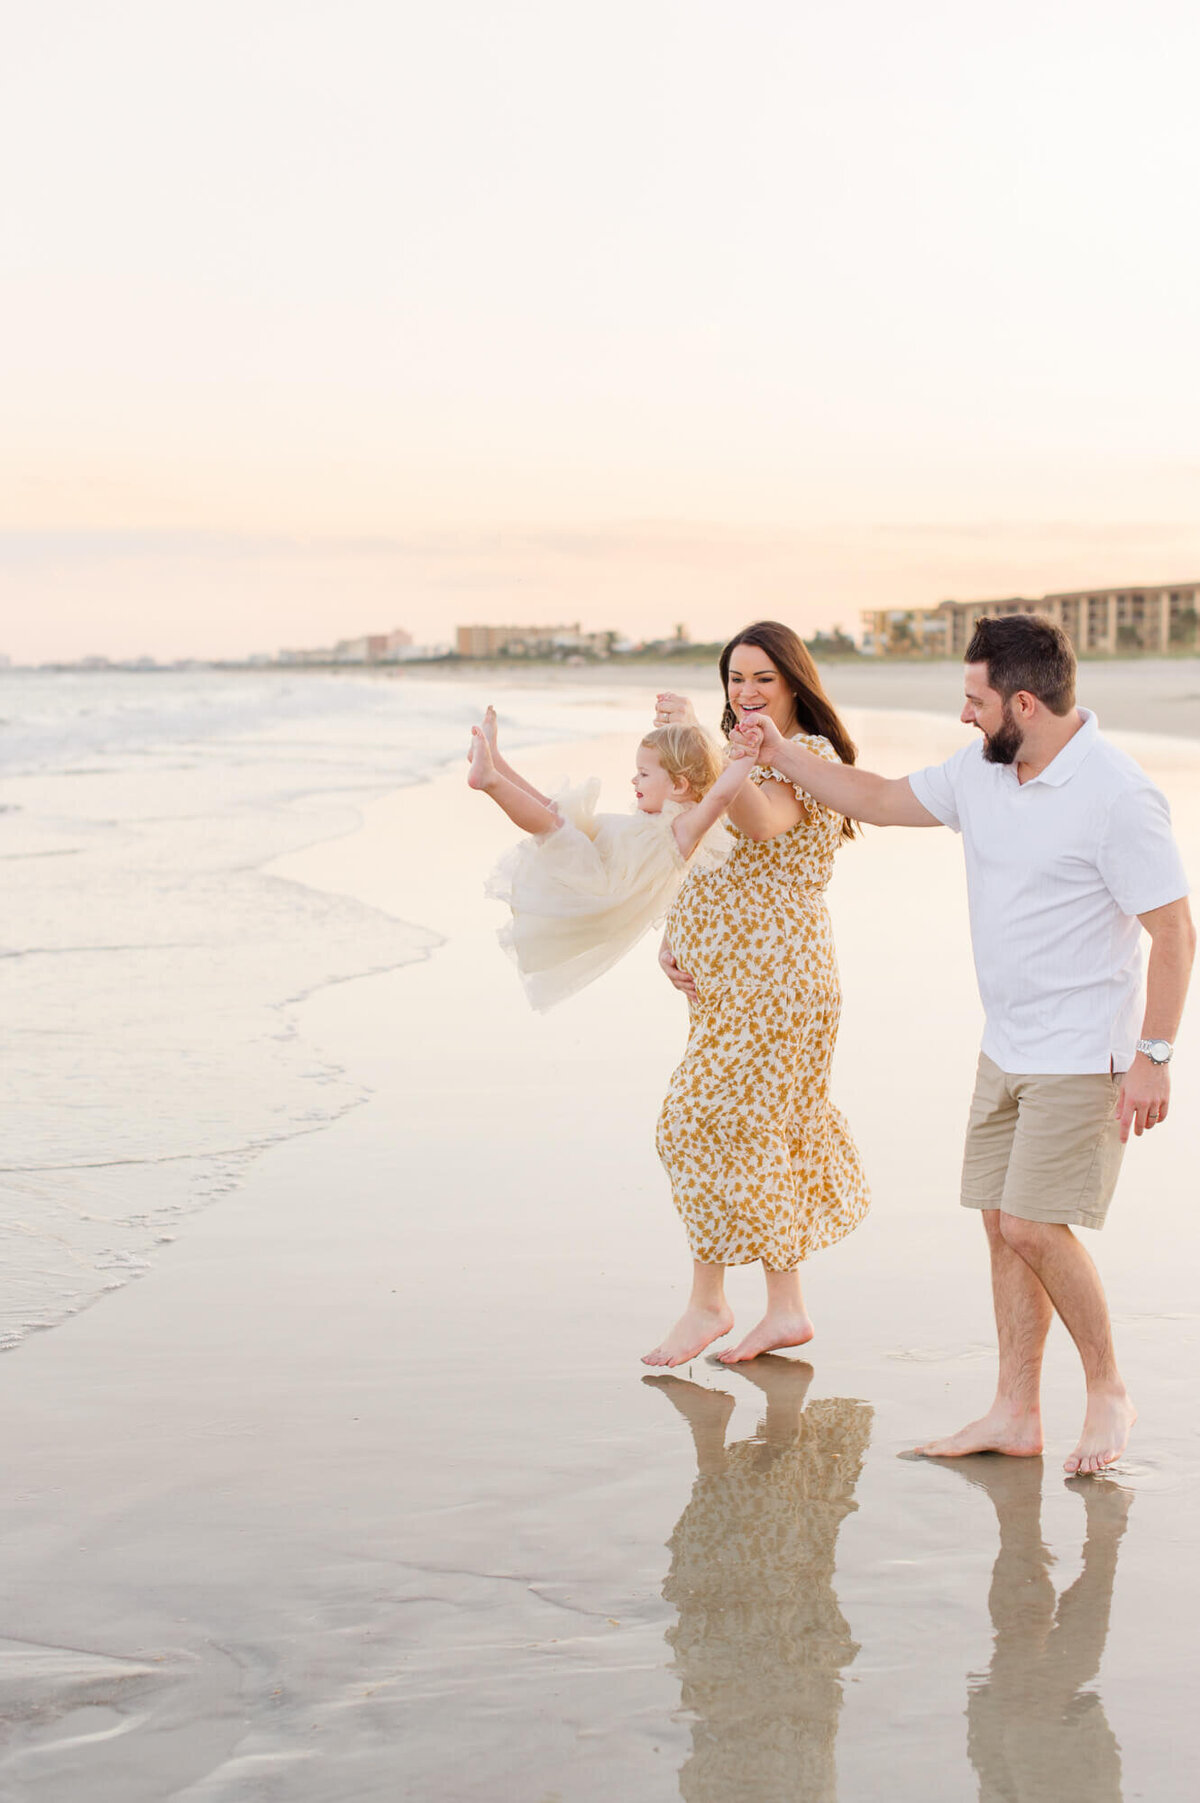 Expectant parents walk along beach at the shoreline swinging their toddler daughter in the air while she laughs at sunset